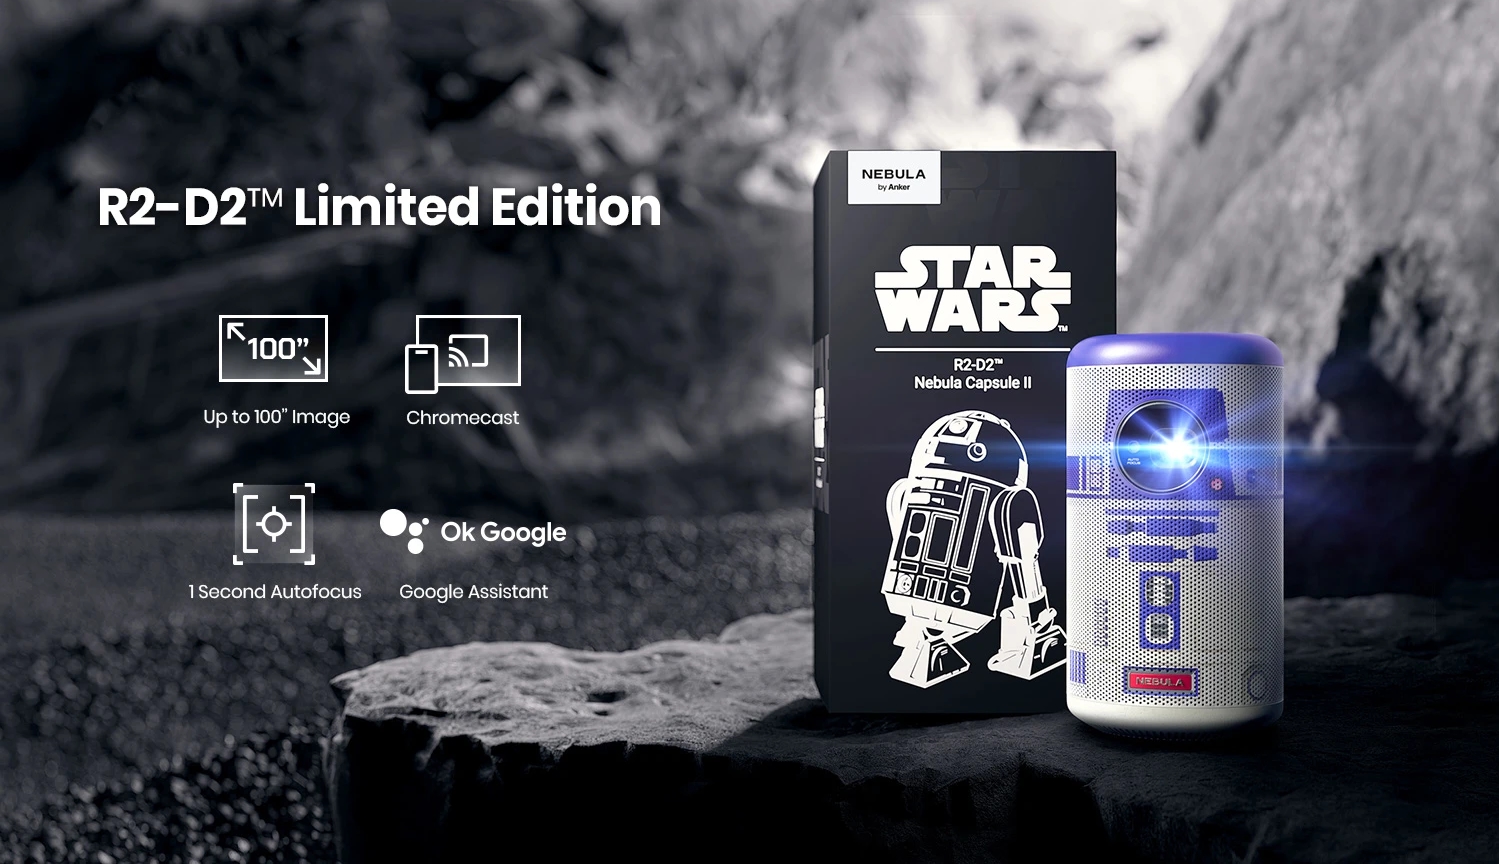 For true Star Wars fans: Anker unveils a special version of the Nebula Capsule II projector in the colors of R2-D2 droid